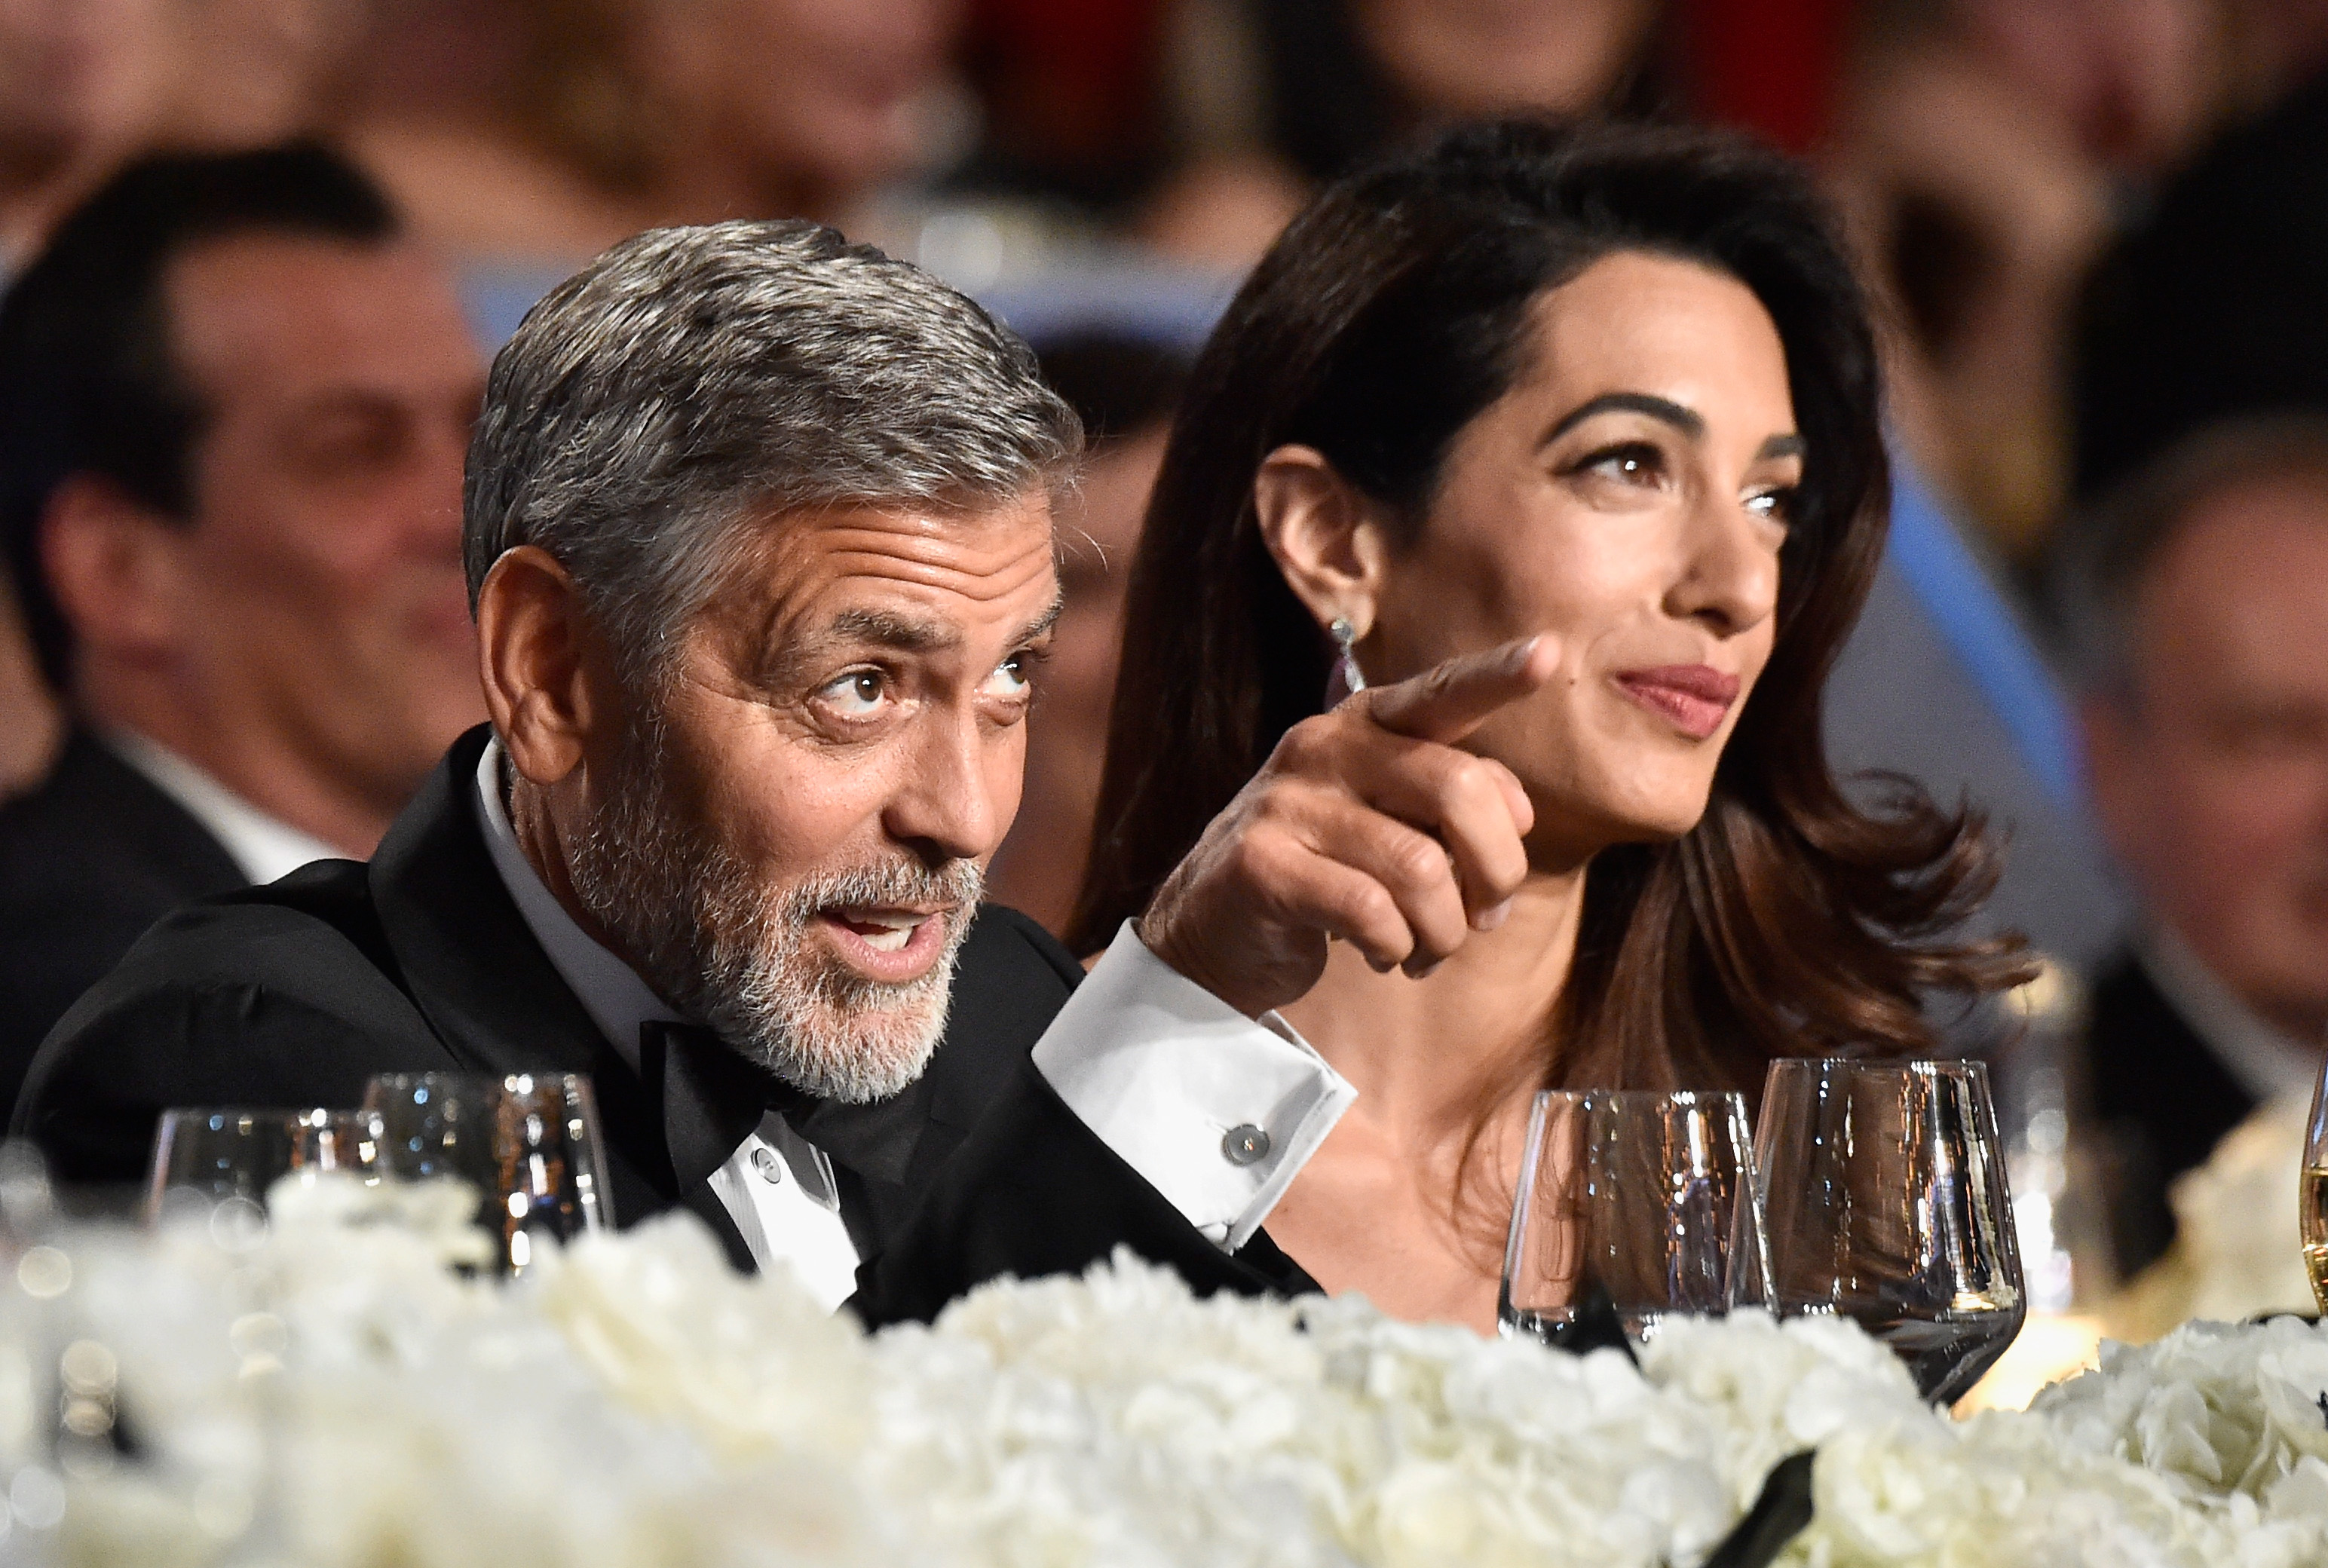 George Clooney and Amal Clooney attend the American Film Institute's 46th Life Achievement Award Gala Tribute to George Clooney at Dolby Theatre on June 7, 2018 in Hollywood, California | Source: Getty Images